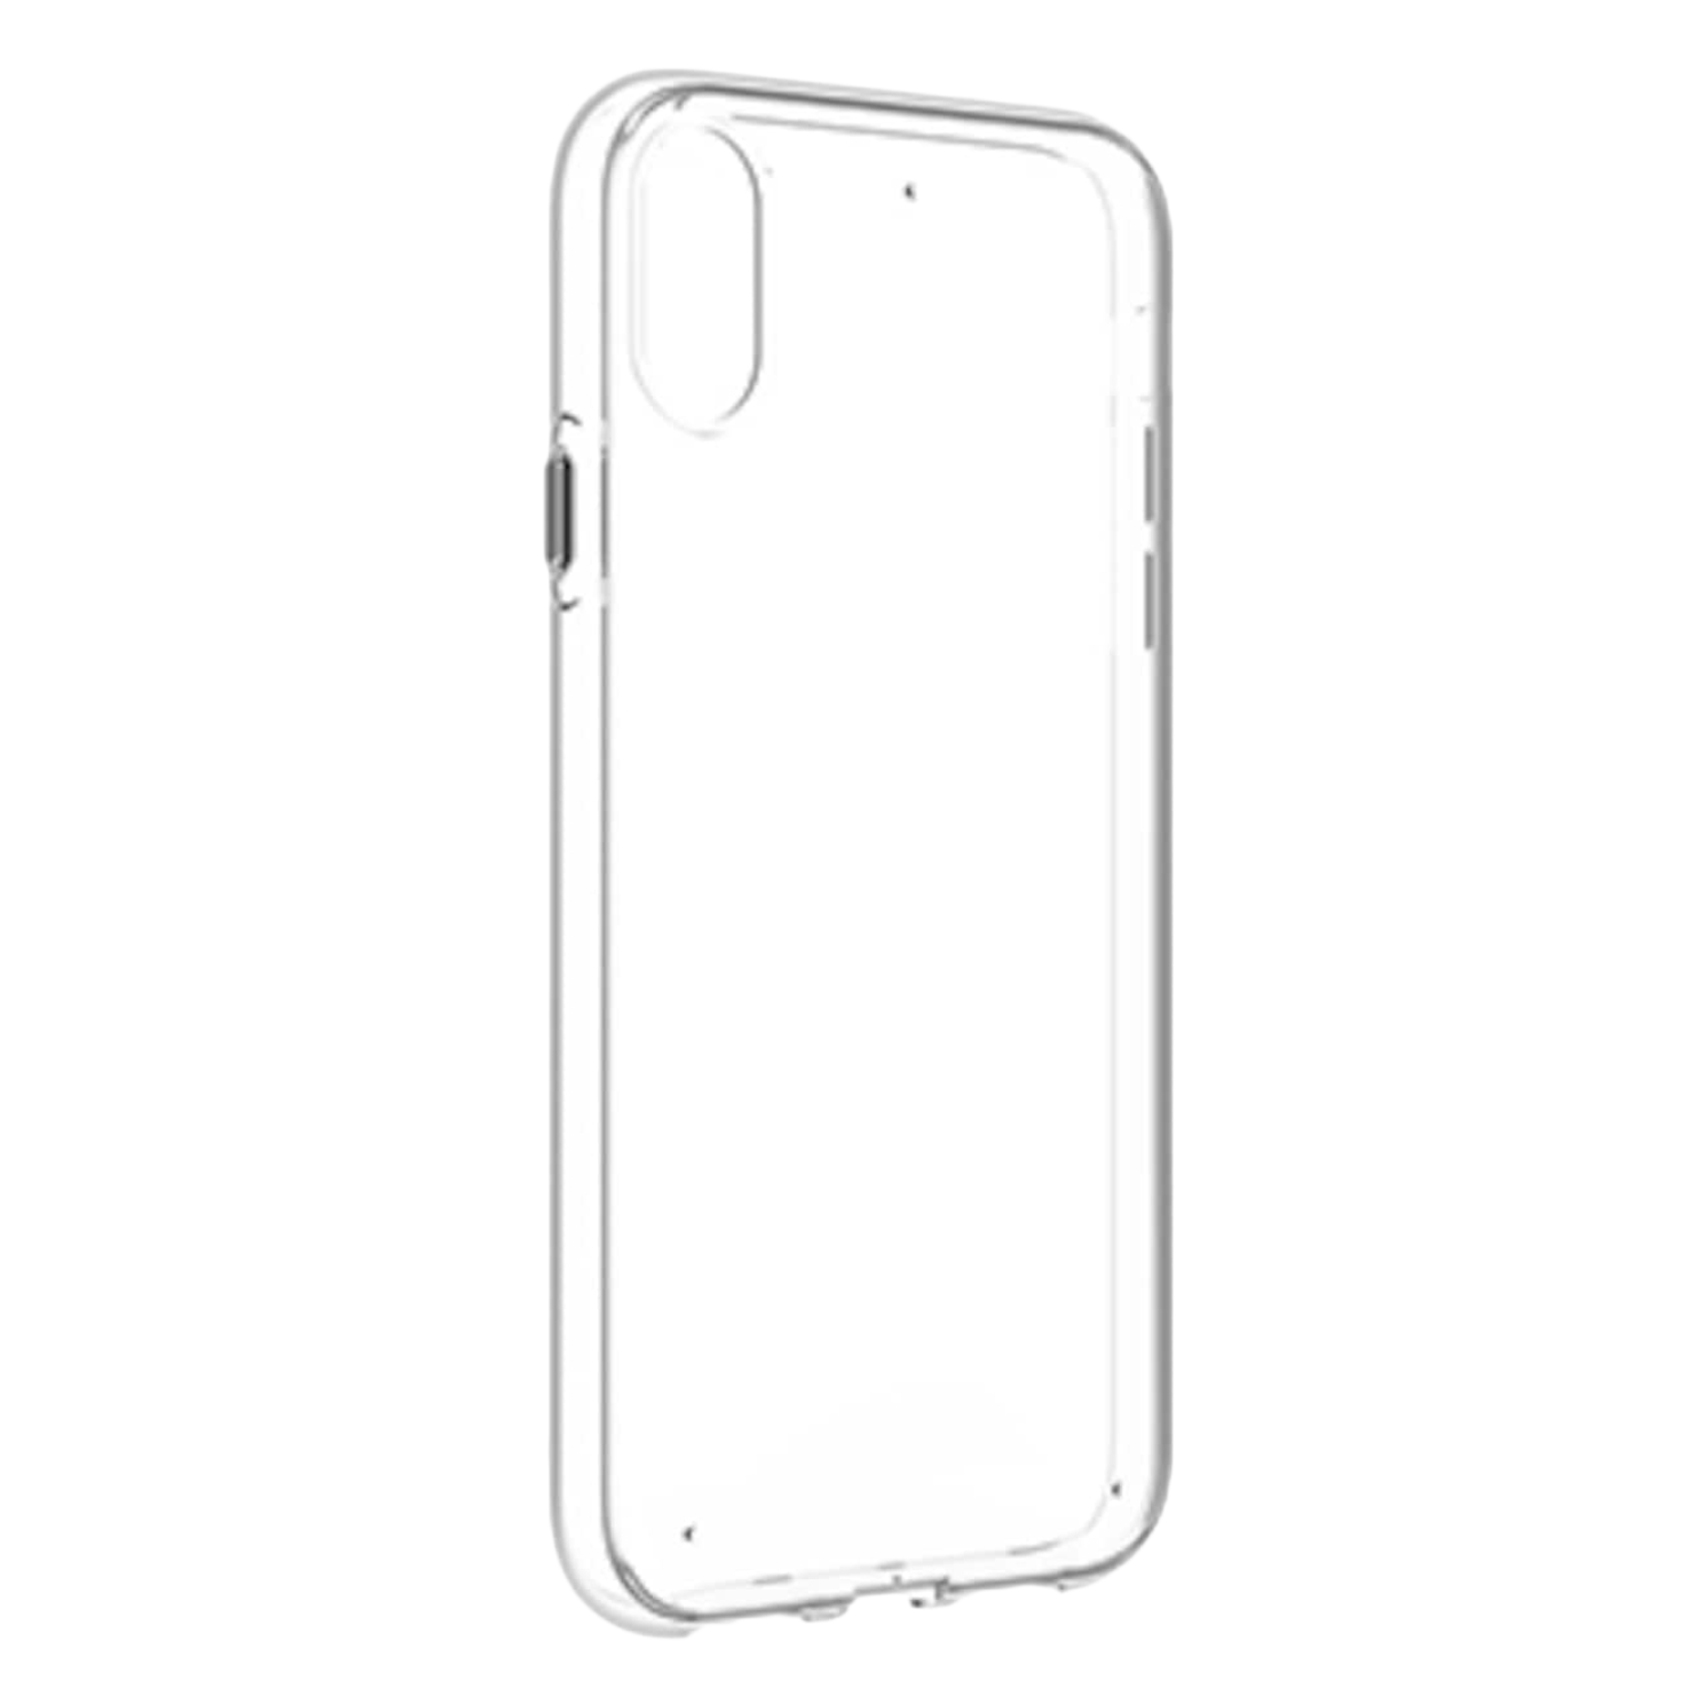 Ezone Apple iPhone X/XS Max Case Cover Clear